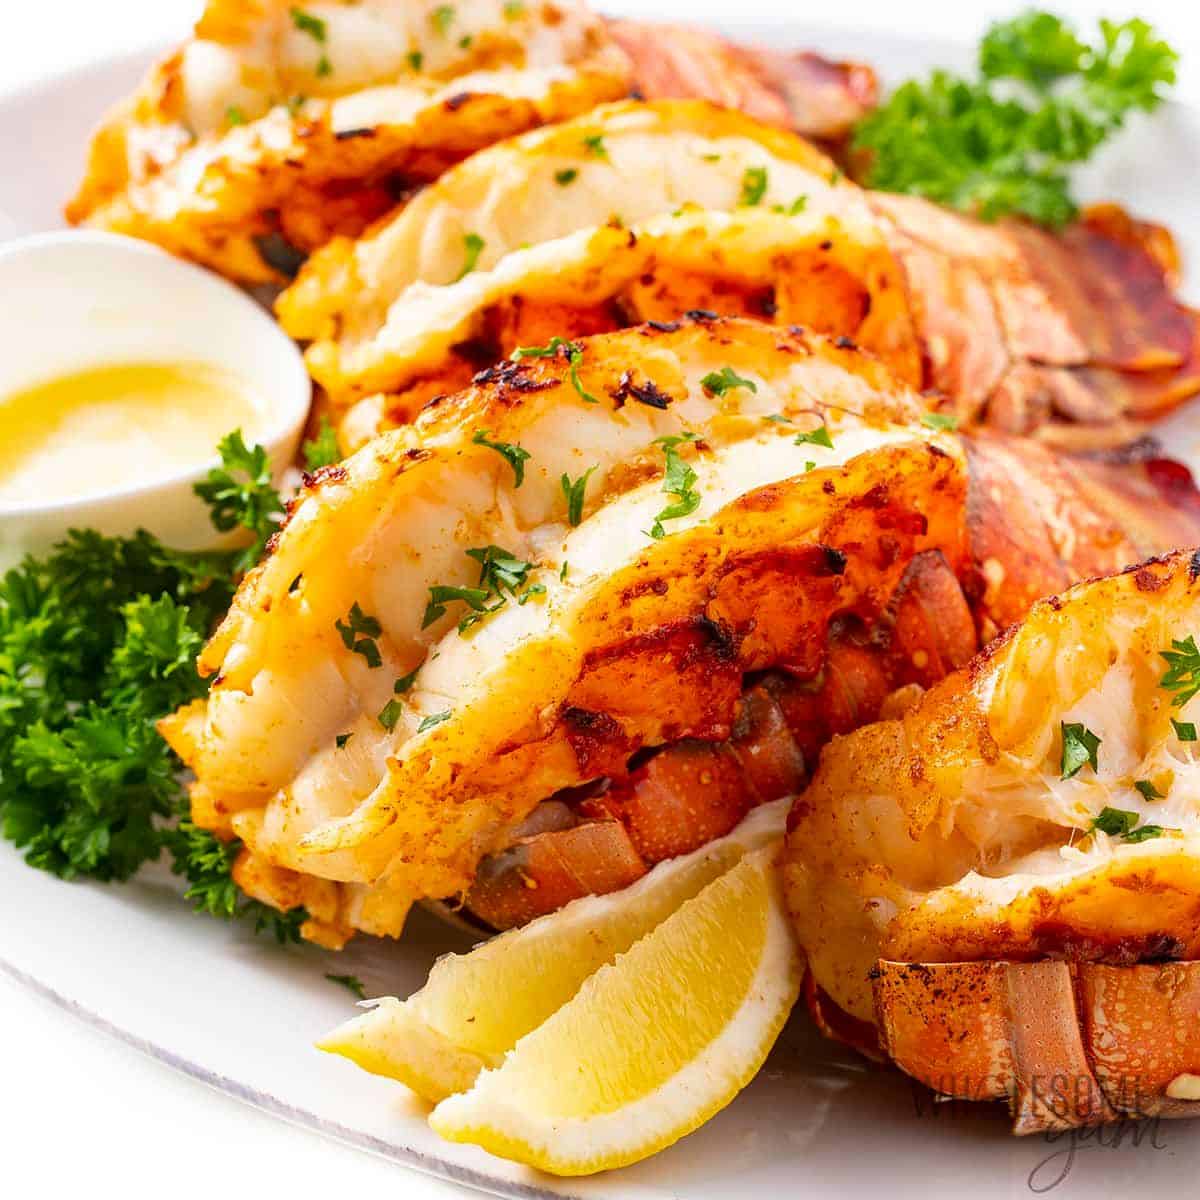 Mouth-watering broiled lobster tail on a tray.